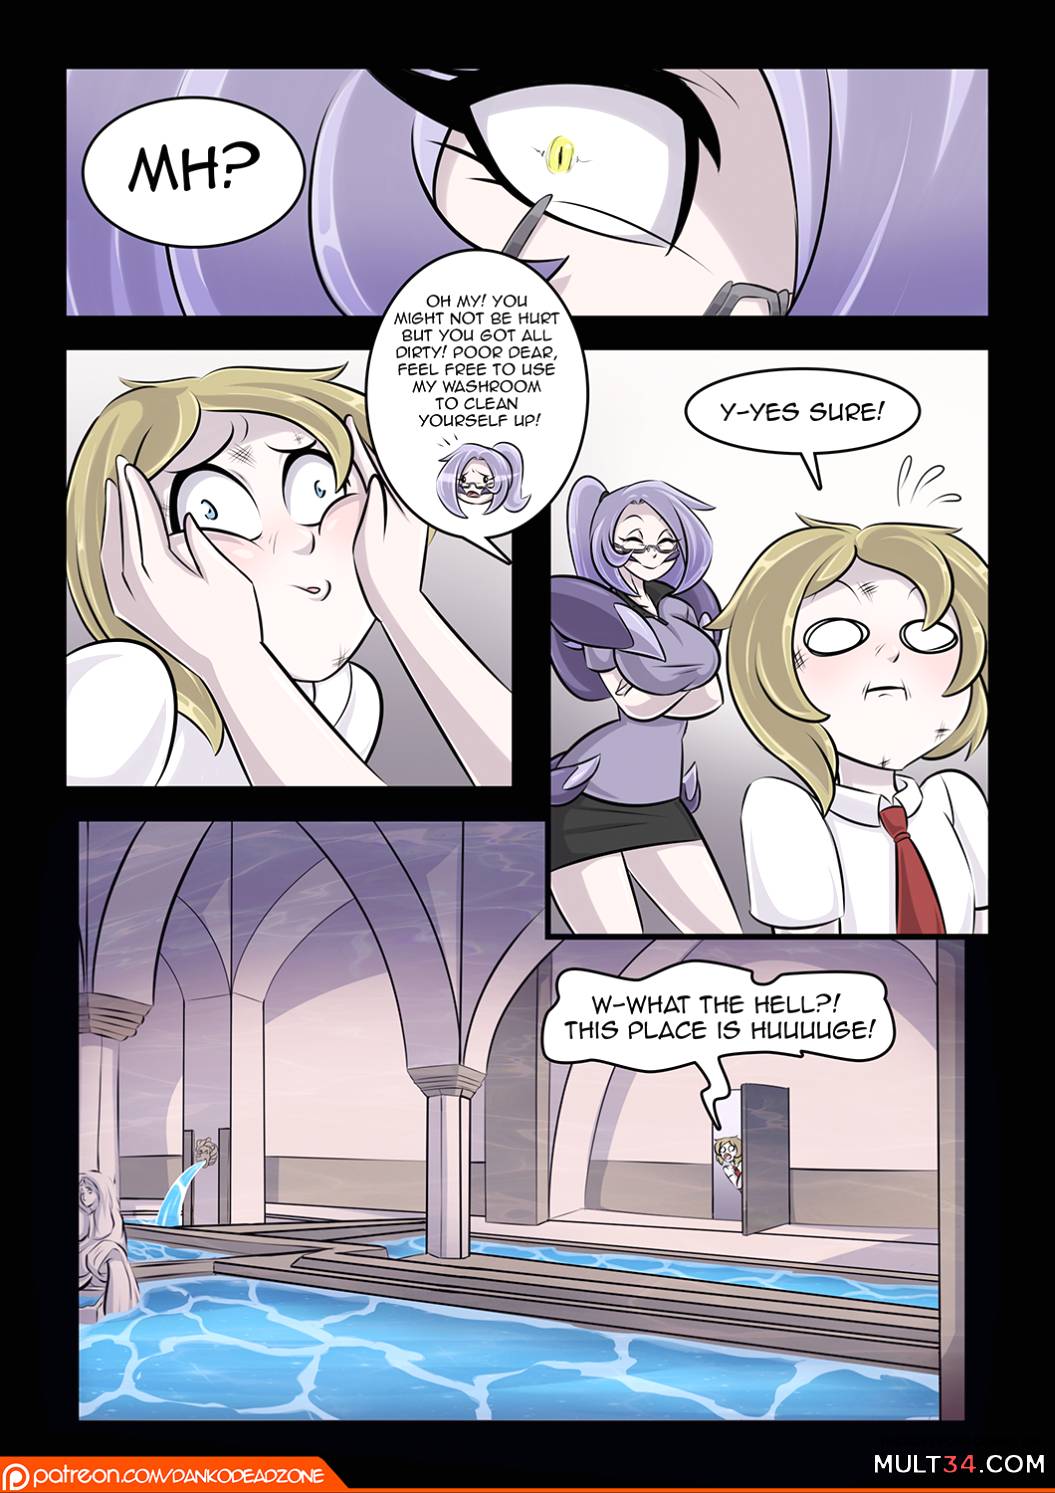 Lady of the Night - Issue 0 page 5